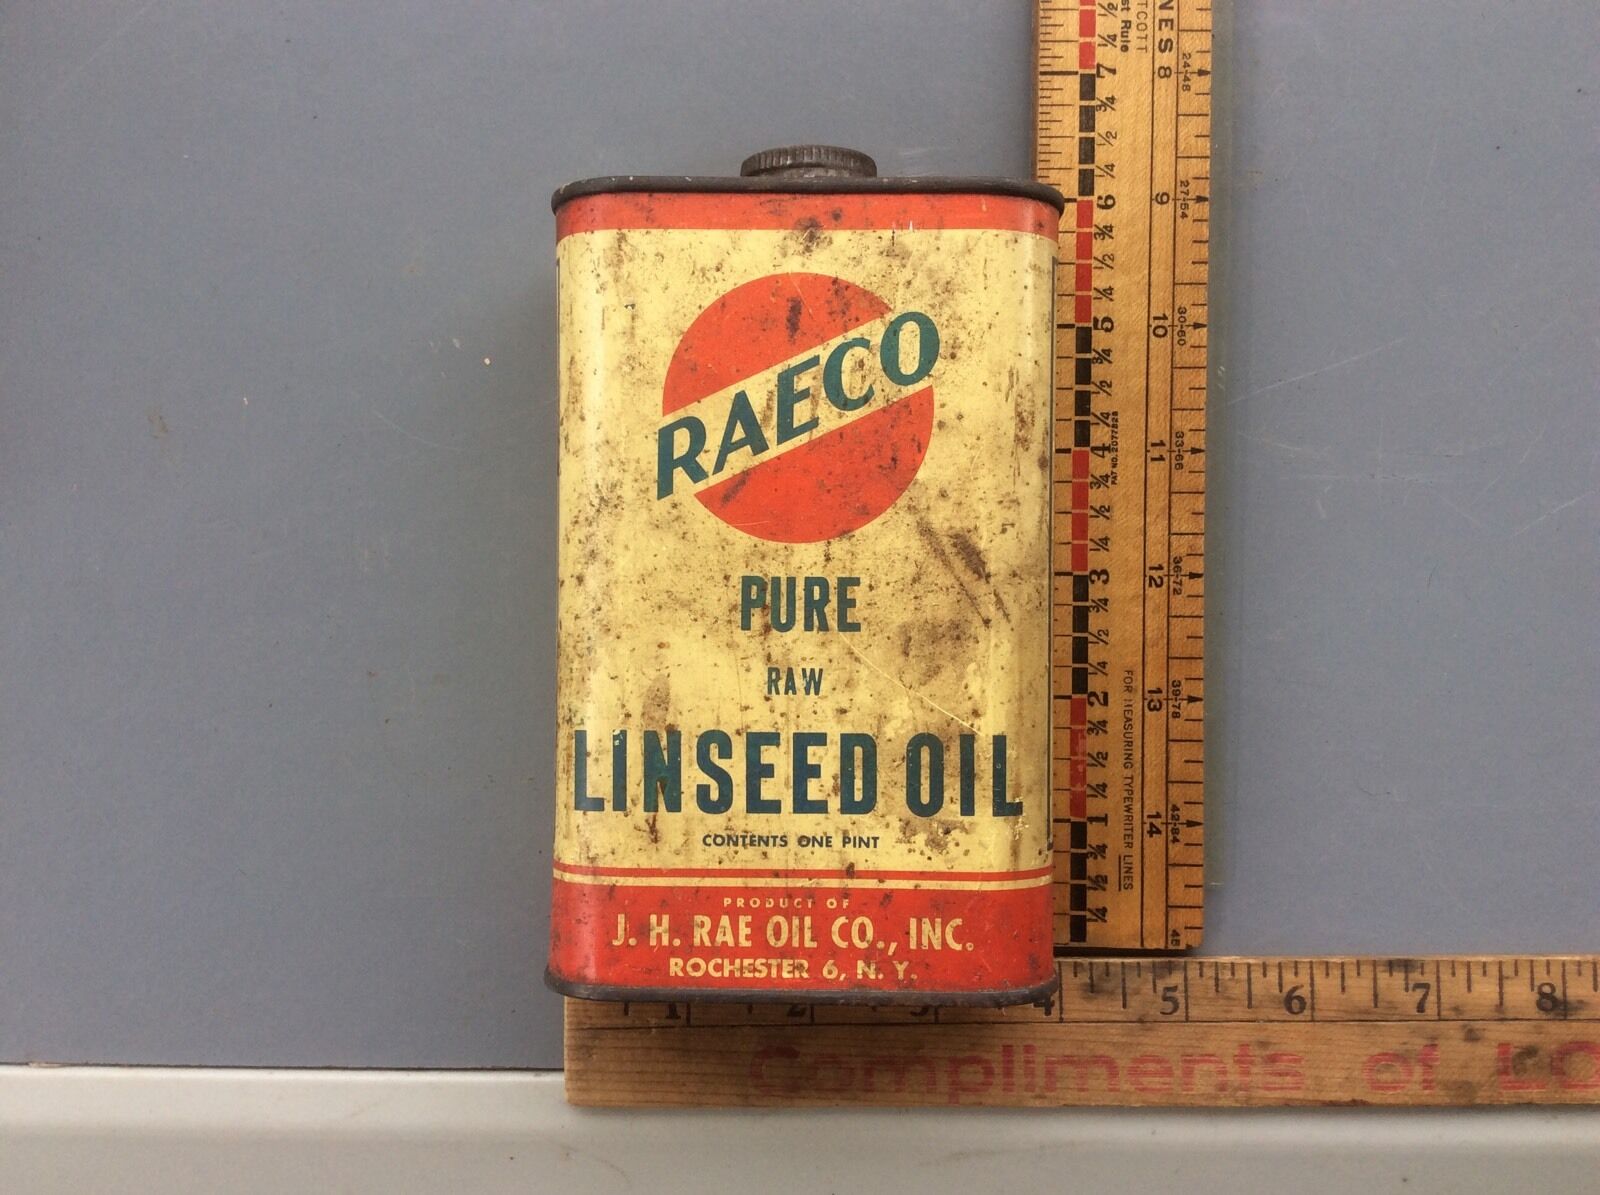 Raeco Pure Raw Linseed Oil Pint Can Advertising, Rochester 6 Ny